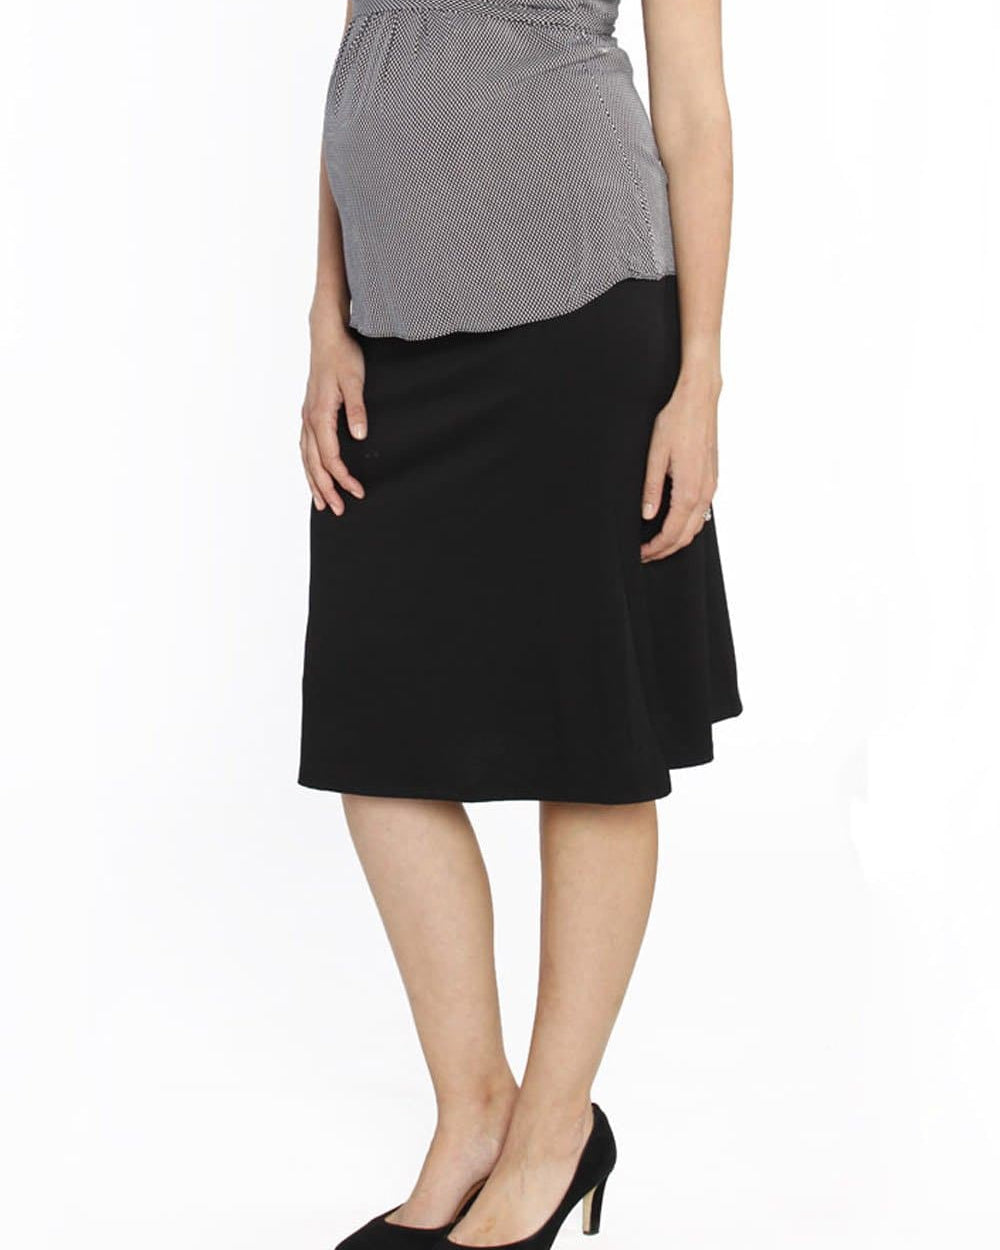 Maternity Soft Stretchy Skirt in Black #3049 - Angel Maternity - Maternity clothes - shop online (10152229446)